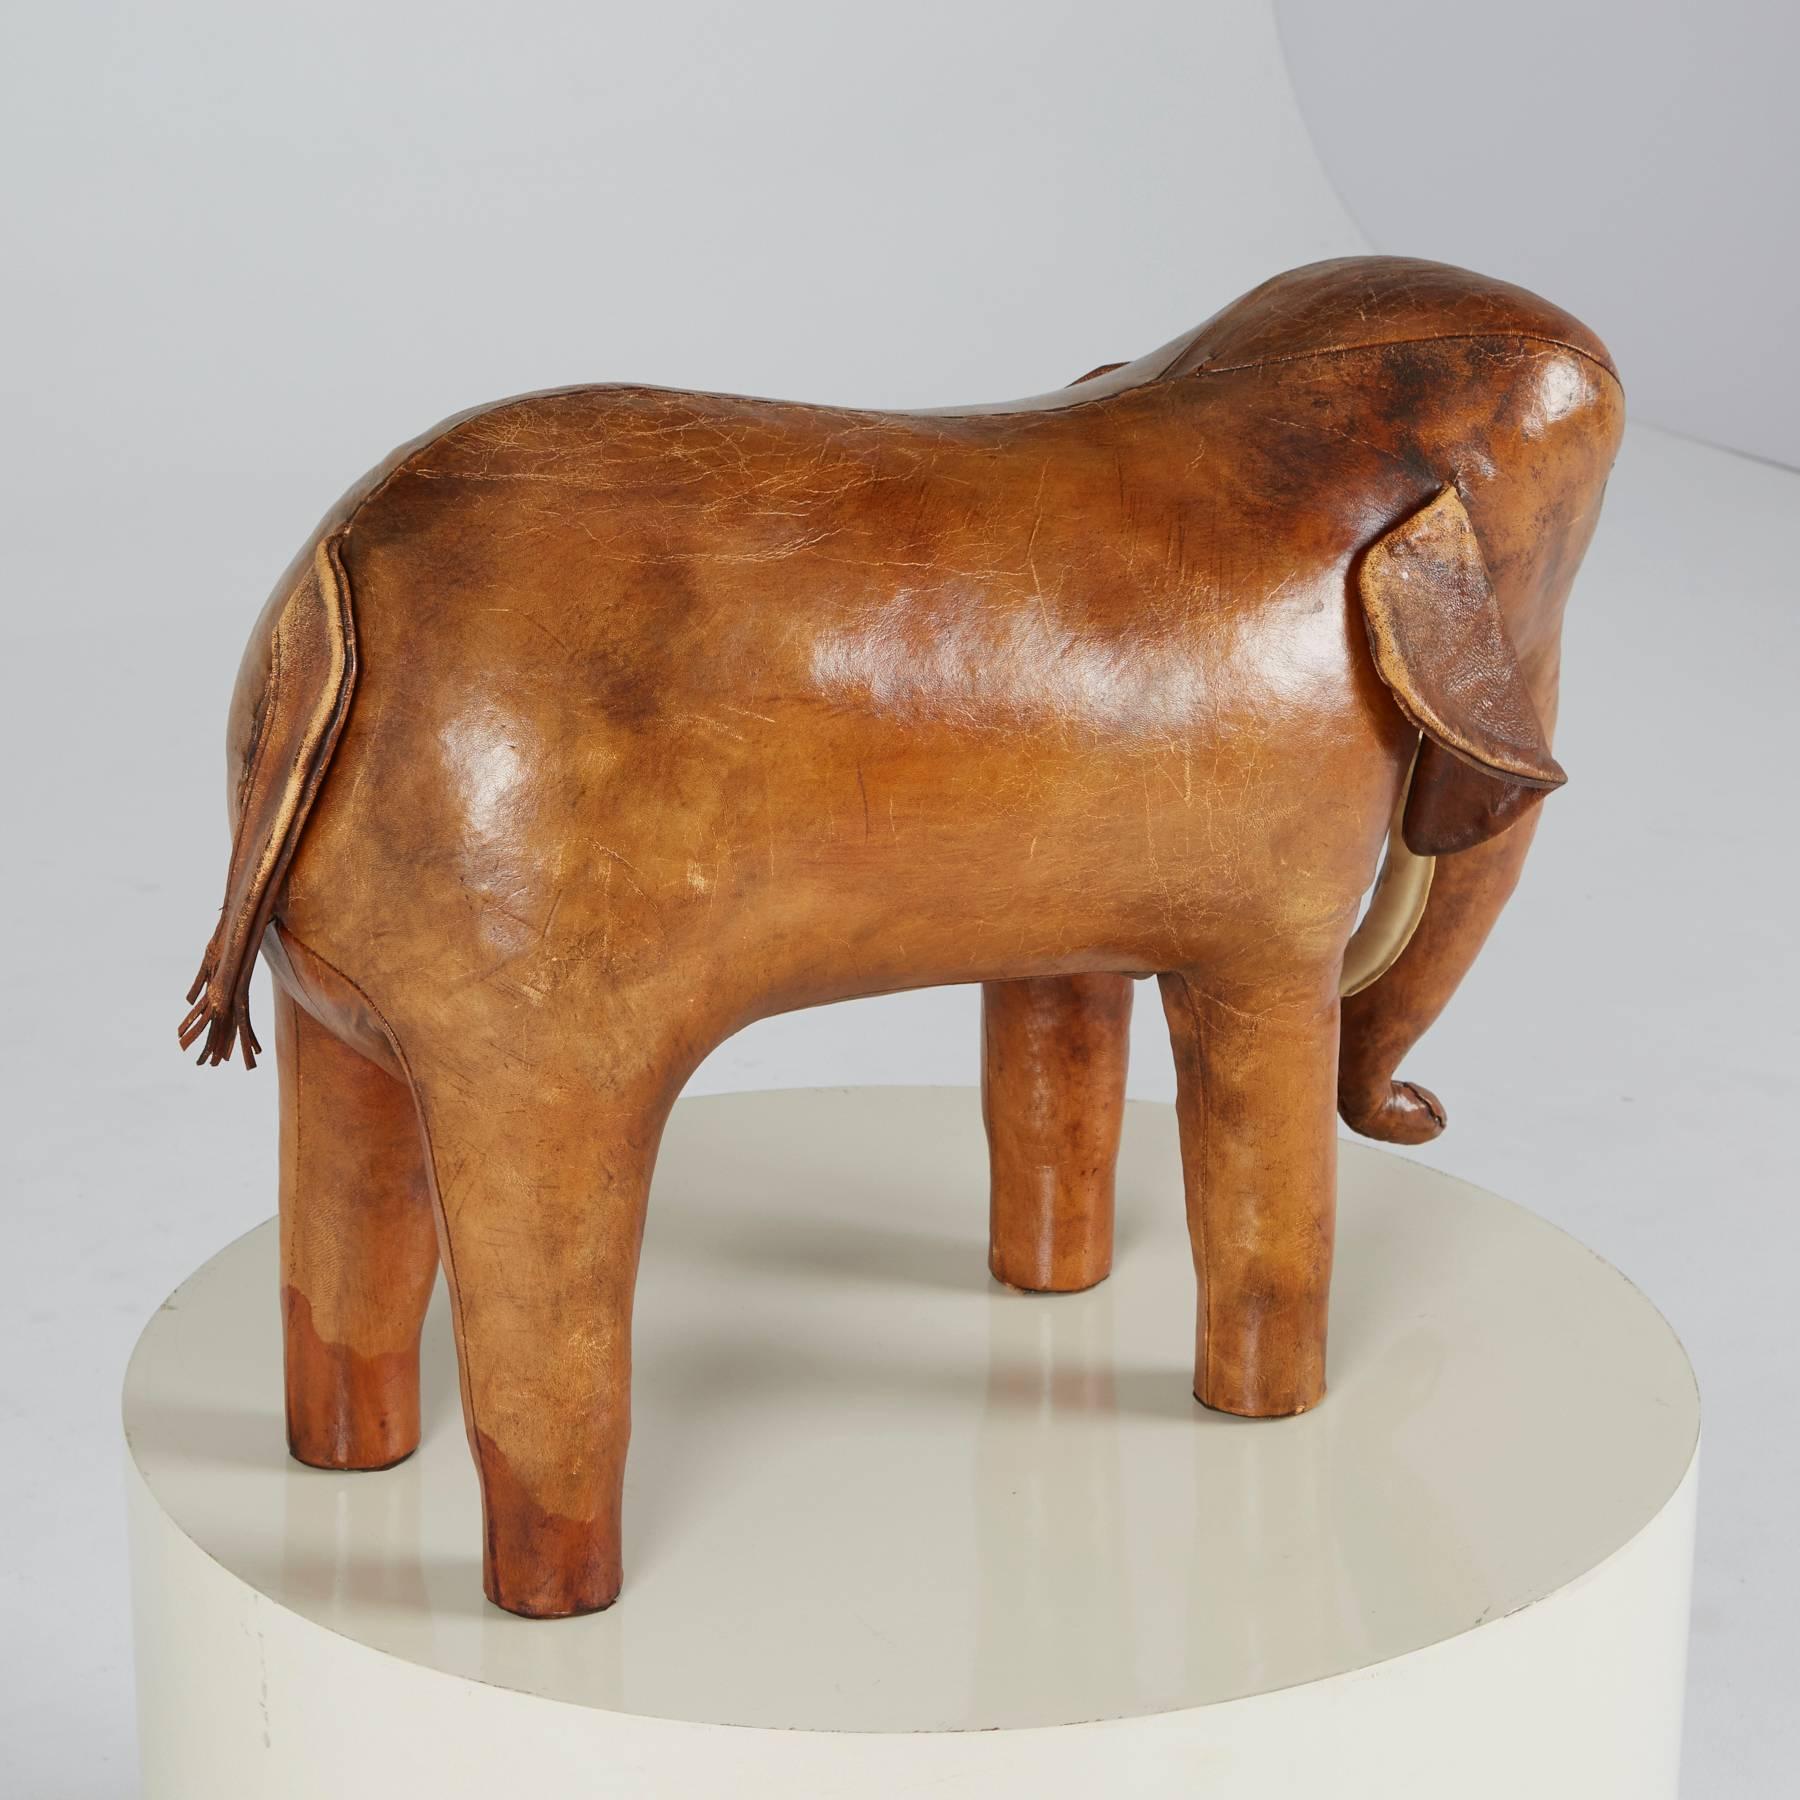 A phenomenal example in tan leather, this large elephant ottoman / footstool by Dimitri Omersa for Abercrombie and Fitch was made in the 1960s. For collectors and interior designers, the leather on this one is exquisite. Incredible color and patina.